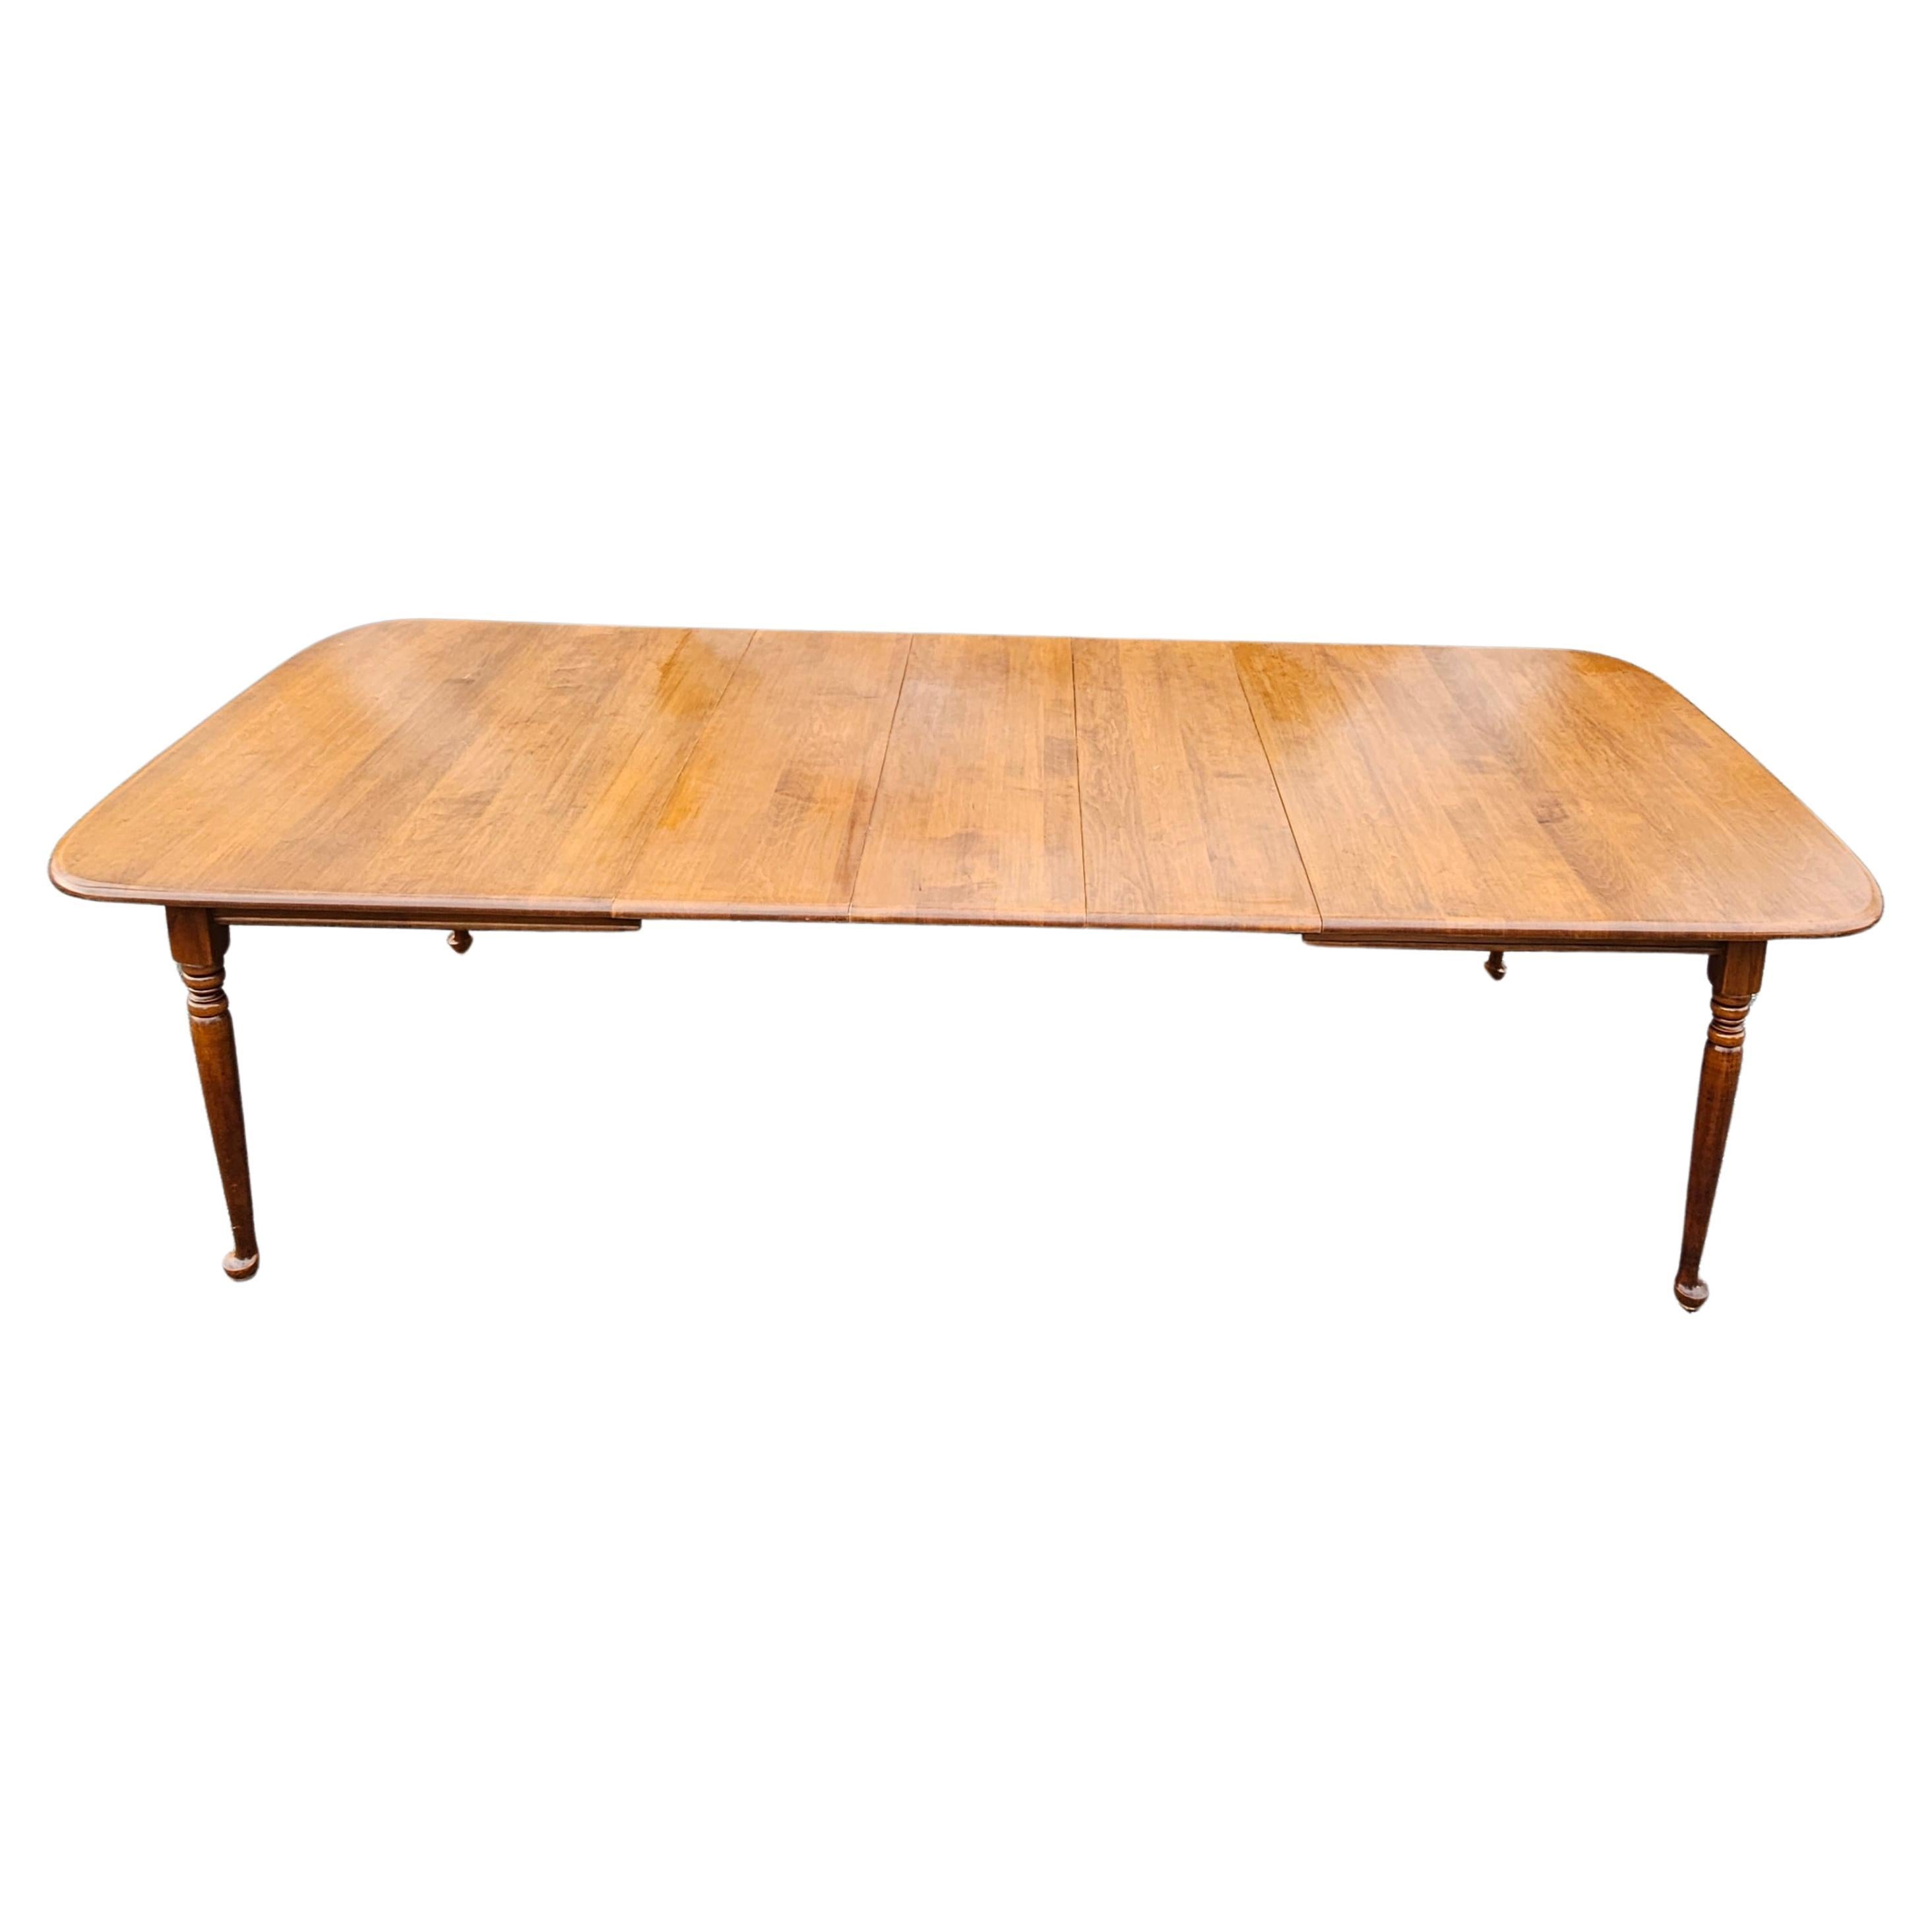 Heywood Wakefield Maple Cinnamon Colonial Style Extension Dining Table In Good Condition For Sale In Germantown, MD